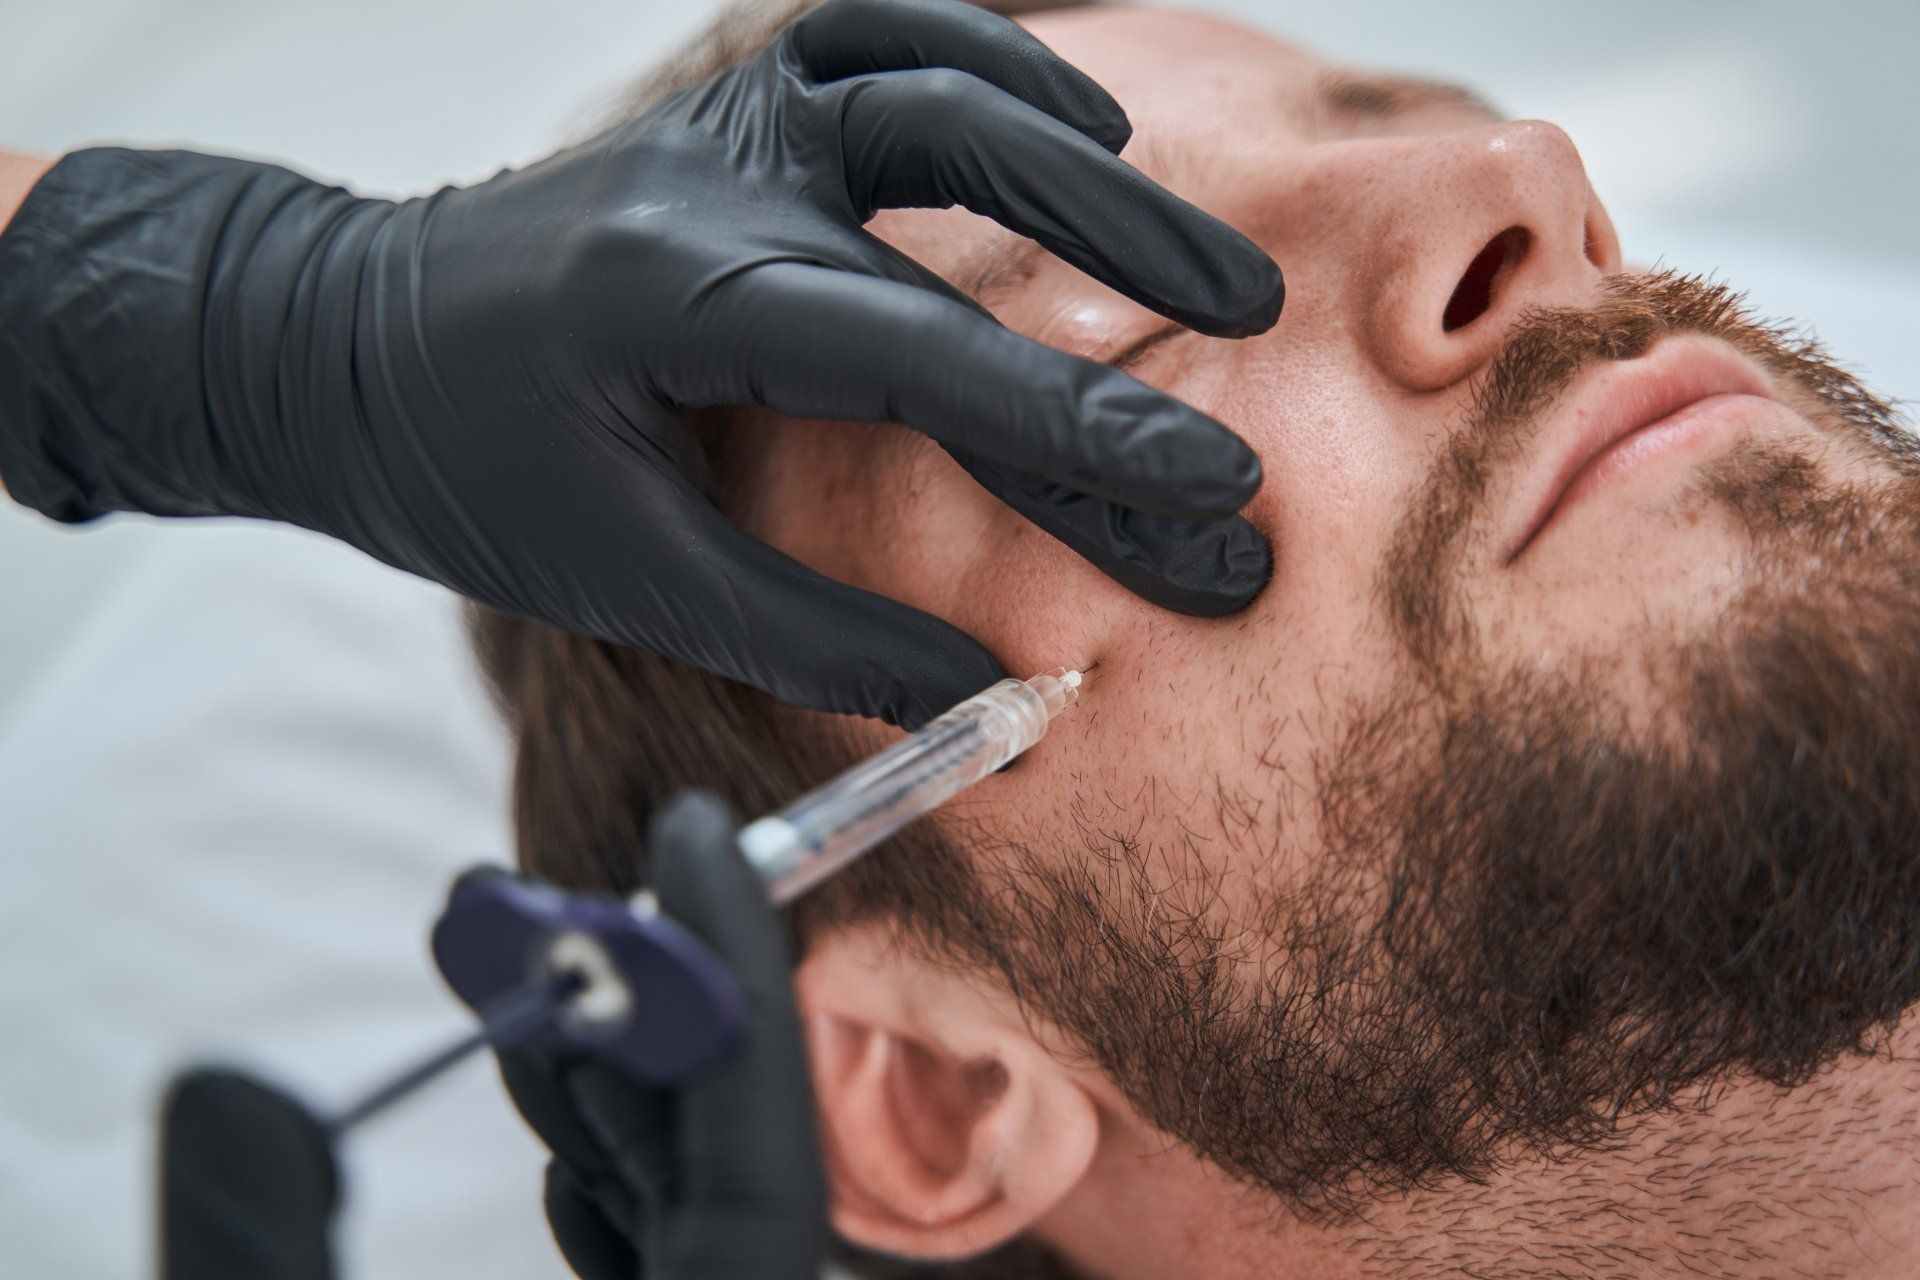 Caucasian man receiving Botox injections in his right cheek